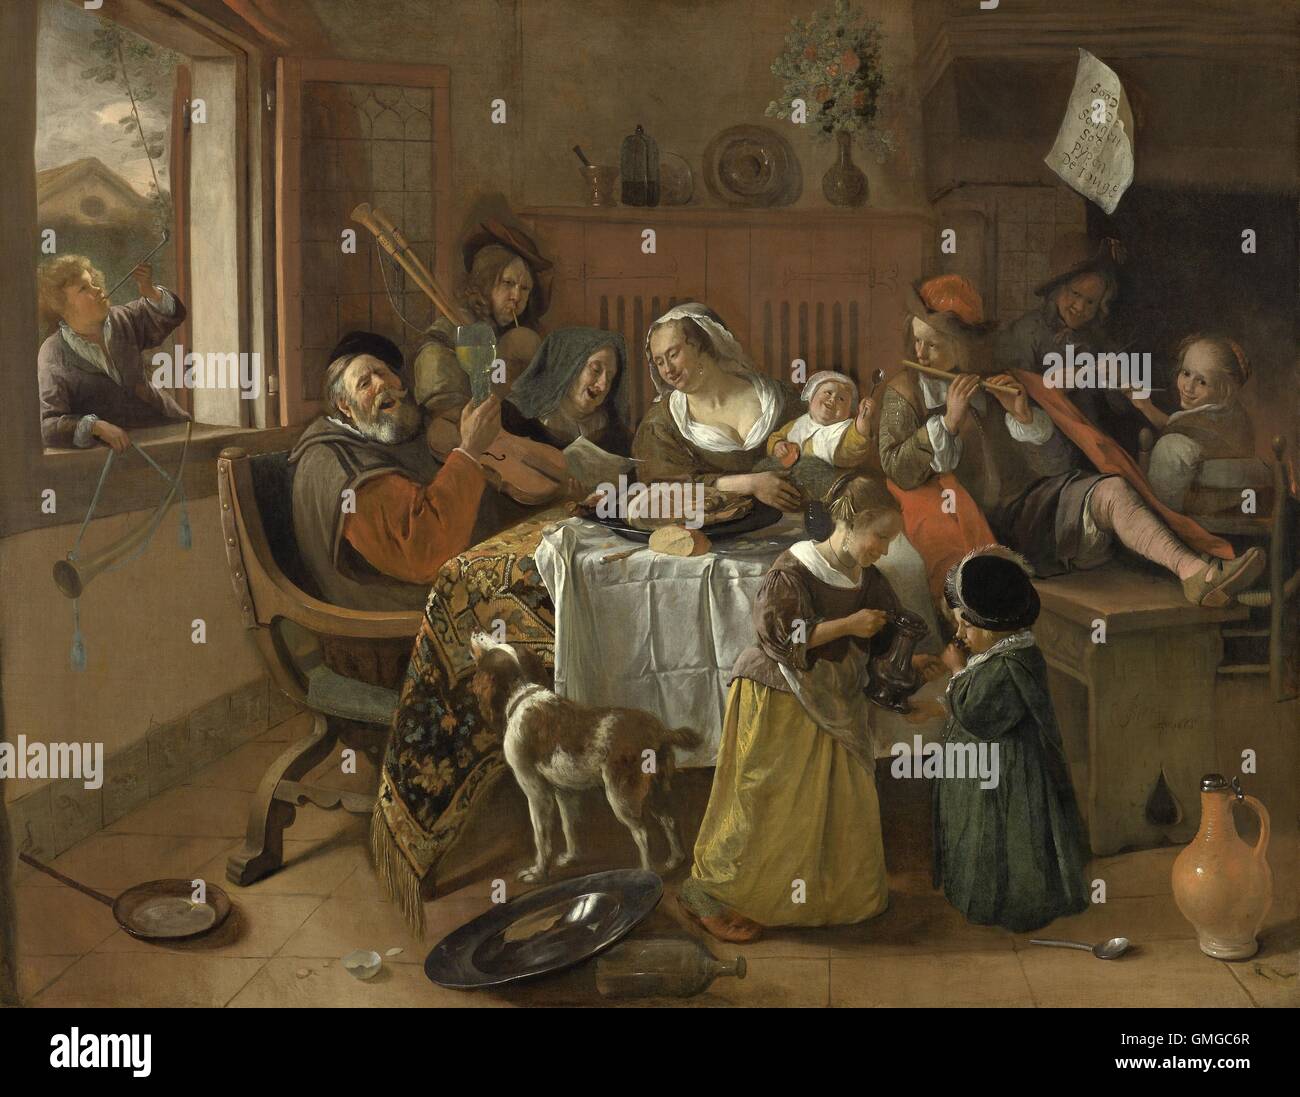 The Merry Family, by Jan Steen, 1668, Dutch painting, oil on canvas. The father sings while raising a glass and the mother and grandmother join in. The children are either blowing into a wind instrument or smoking a long pipe or drinking. A moralizing note hangs on the mantle, ‘As the old sing, so shall the young twitter’ (BSLOC 2016 3 165) Stock Photo